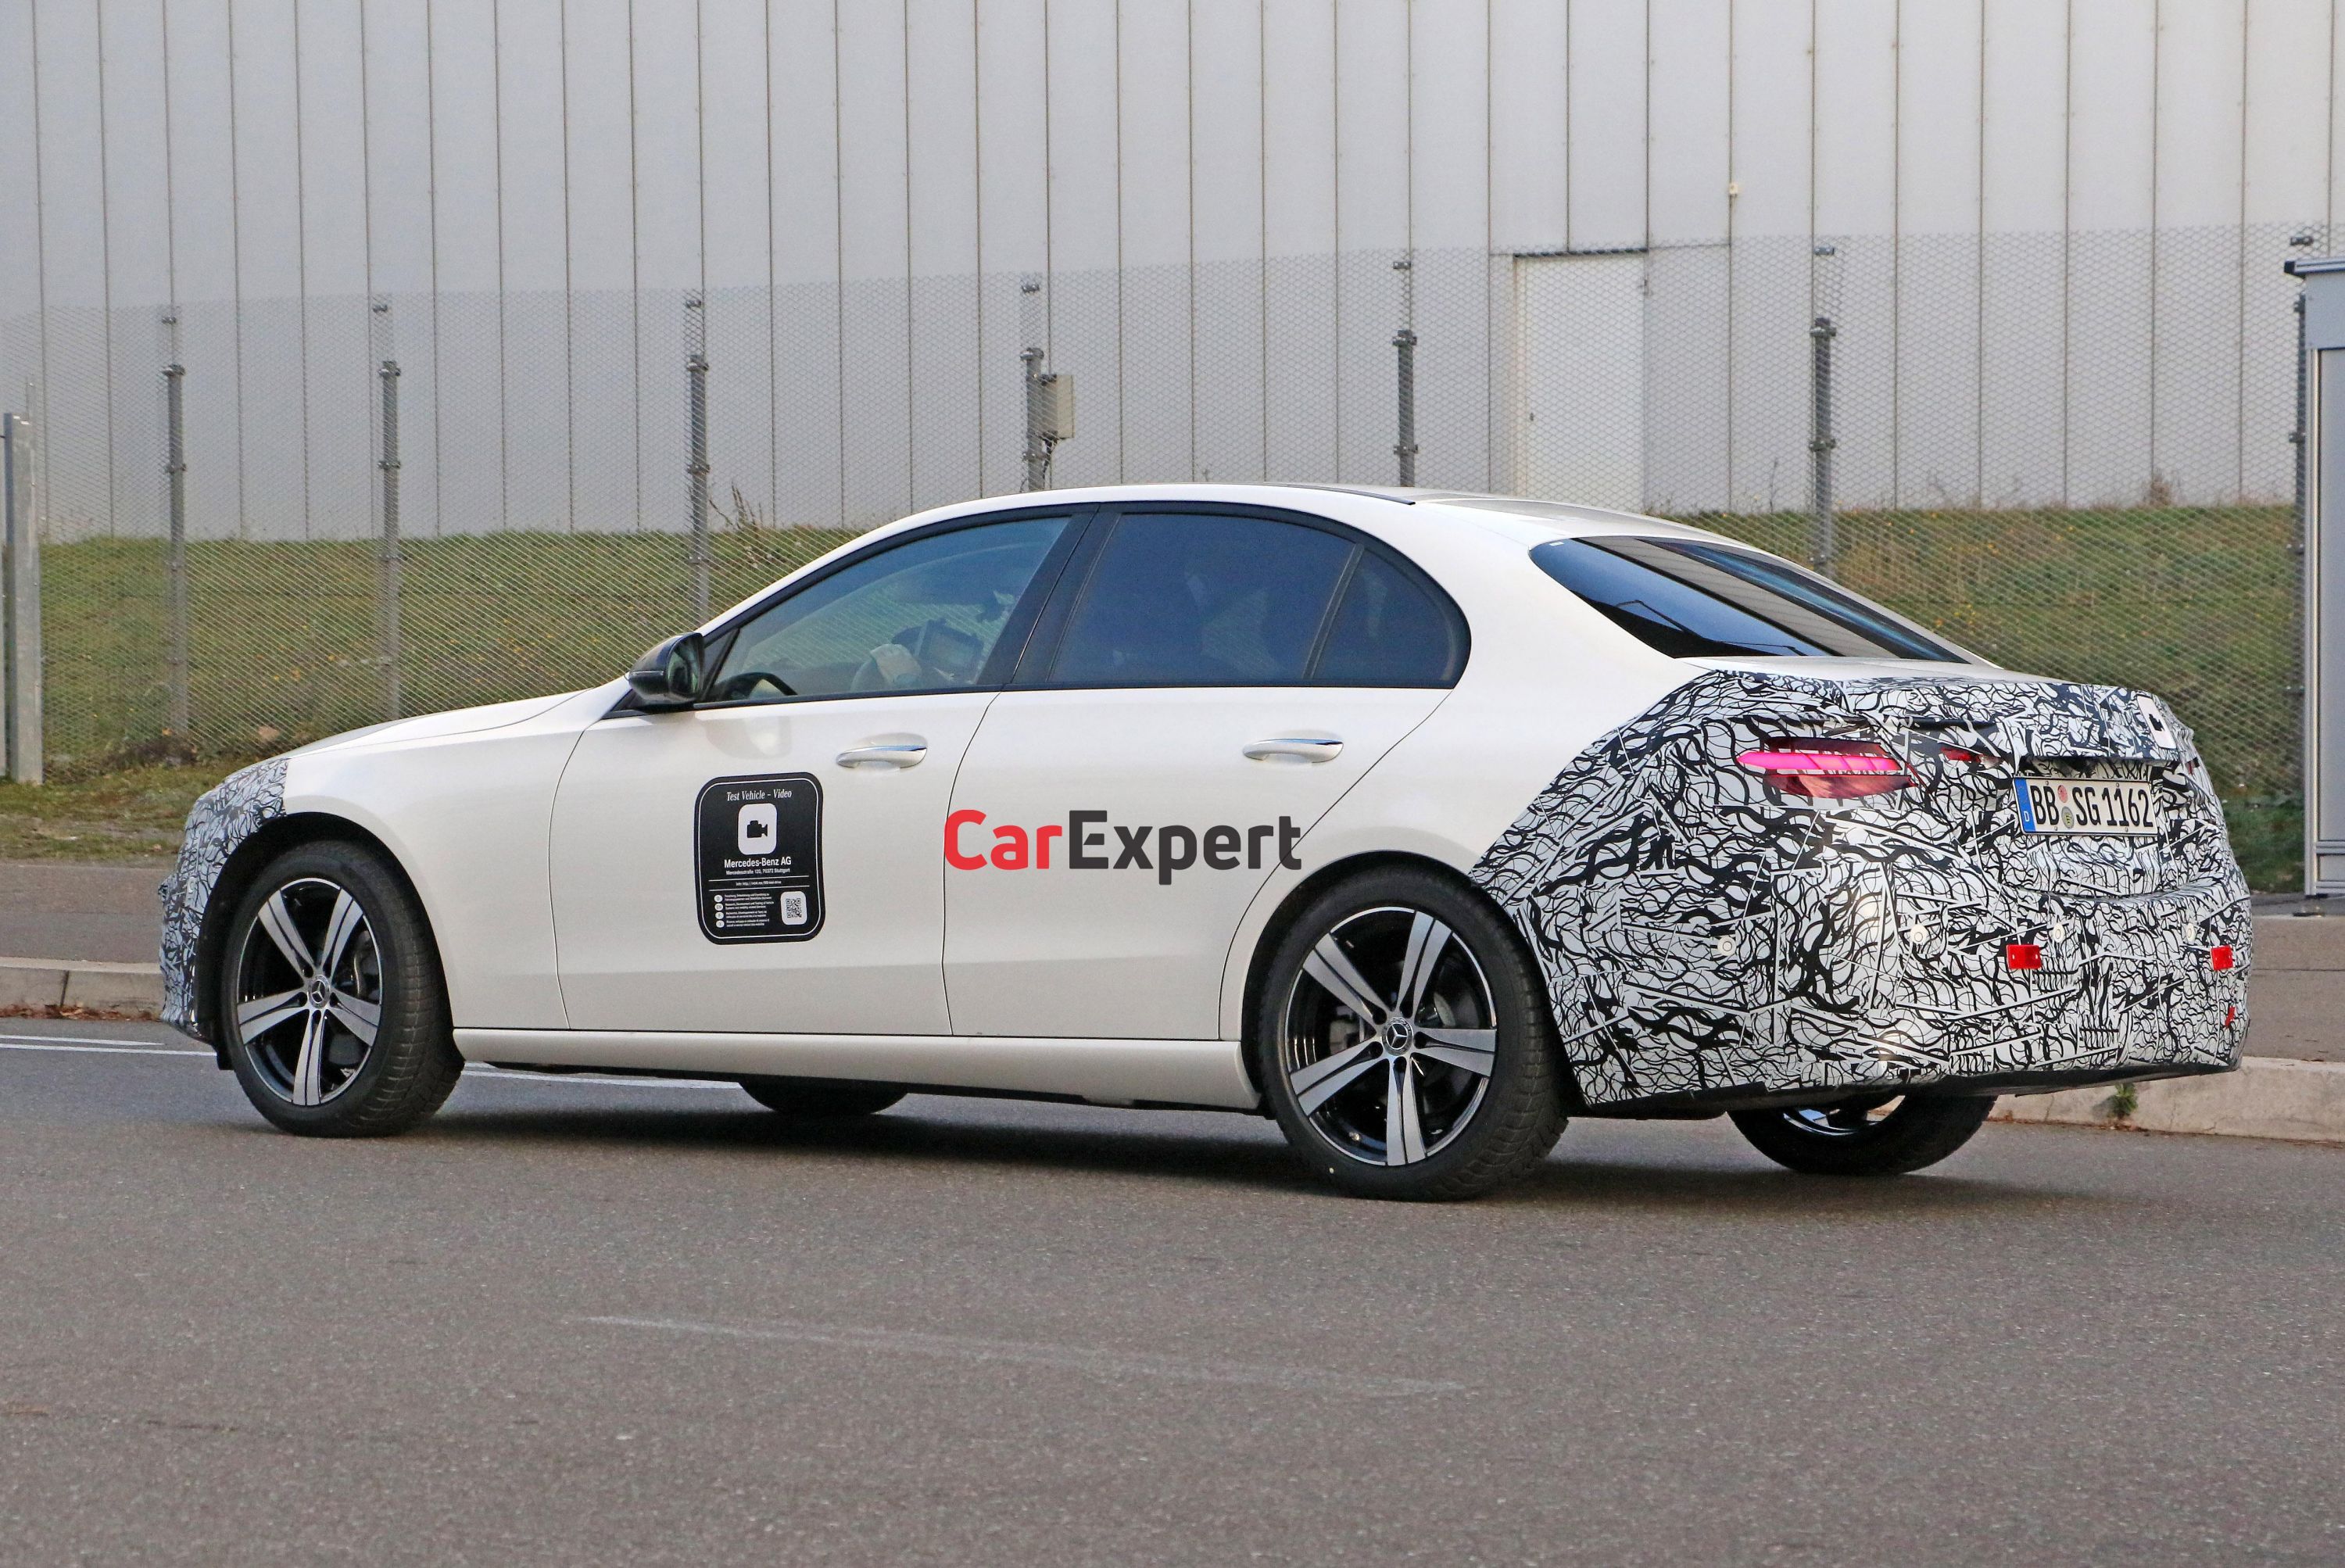 2021 Mercedes-Benz C-Class spied with less camouflage | CarExpert